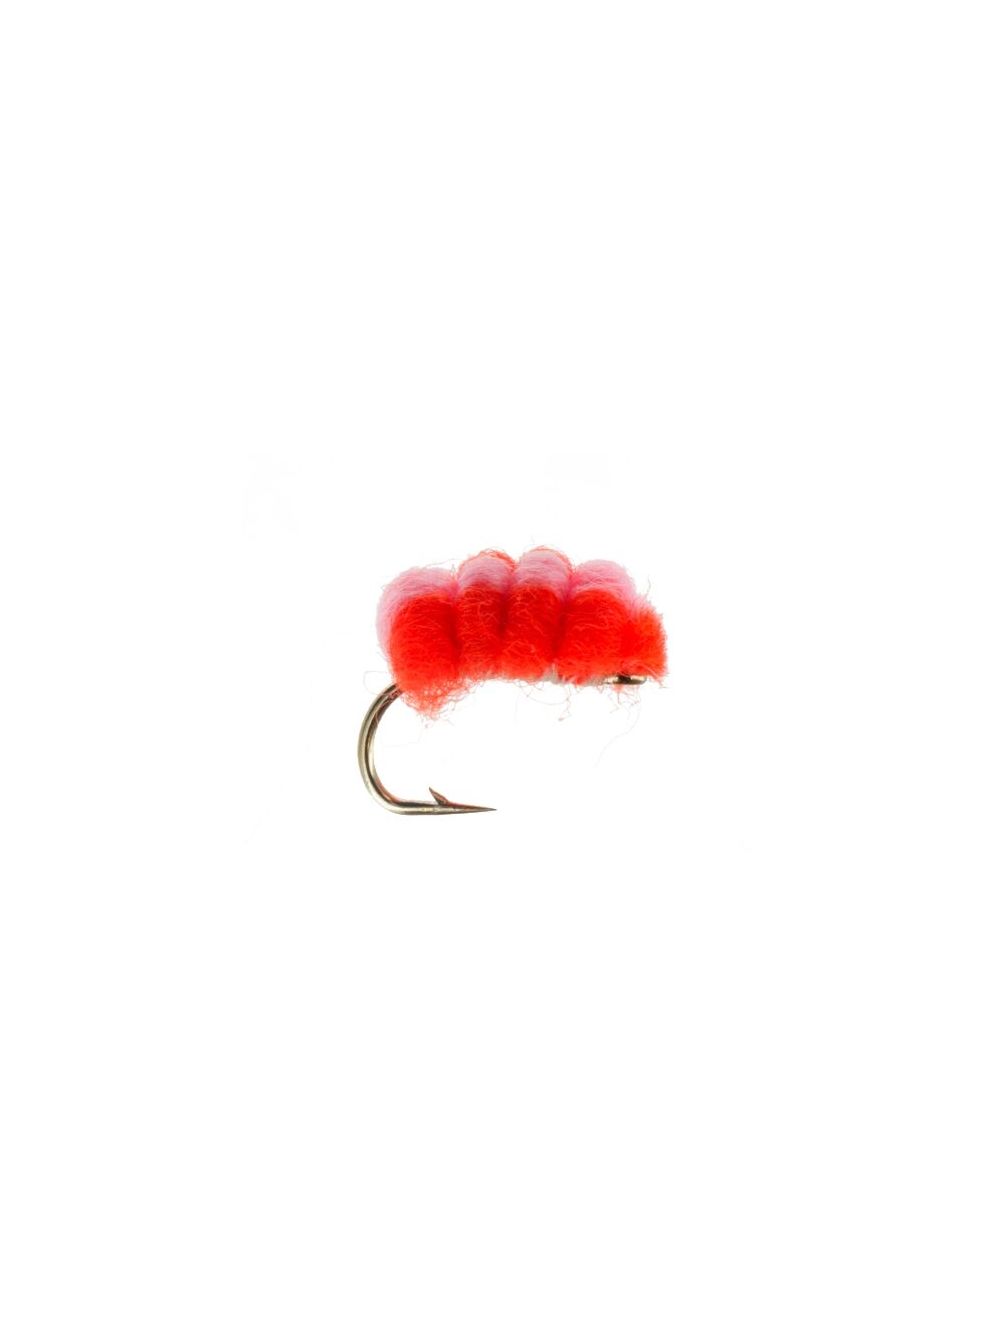 Blood Line, Flame/Baby Pink TheFlyStop